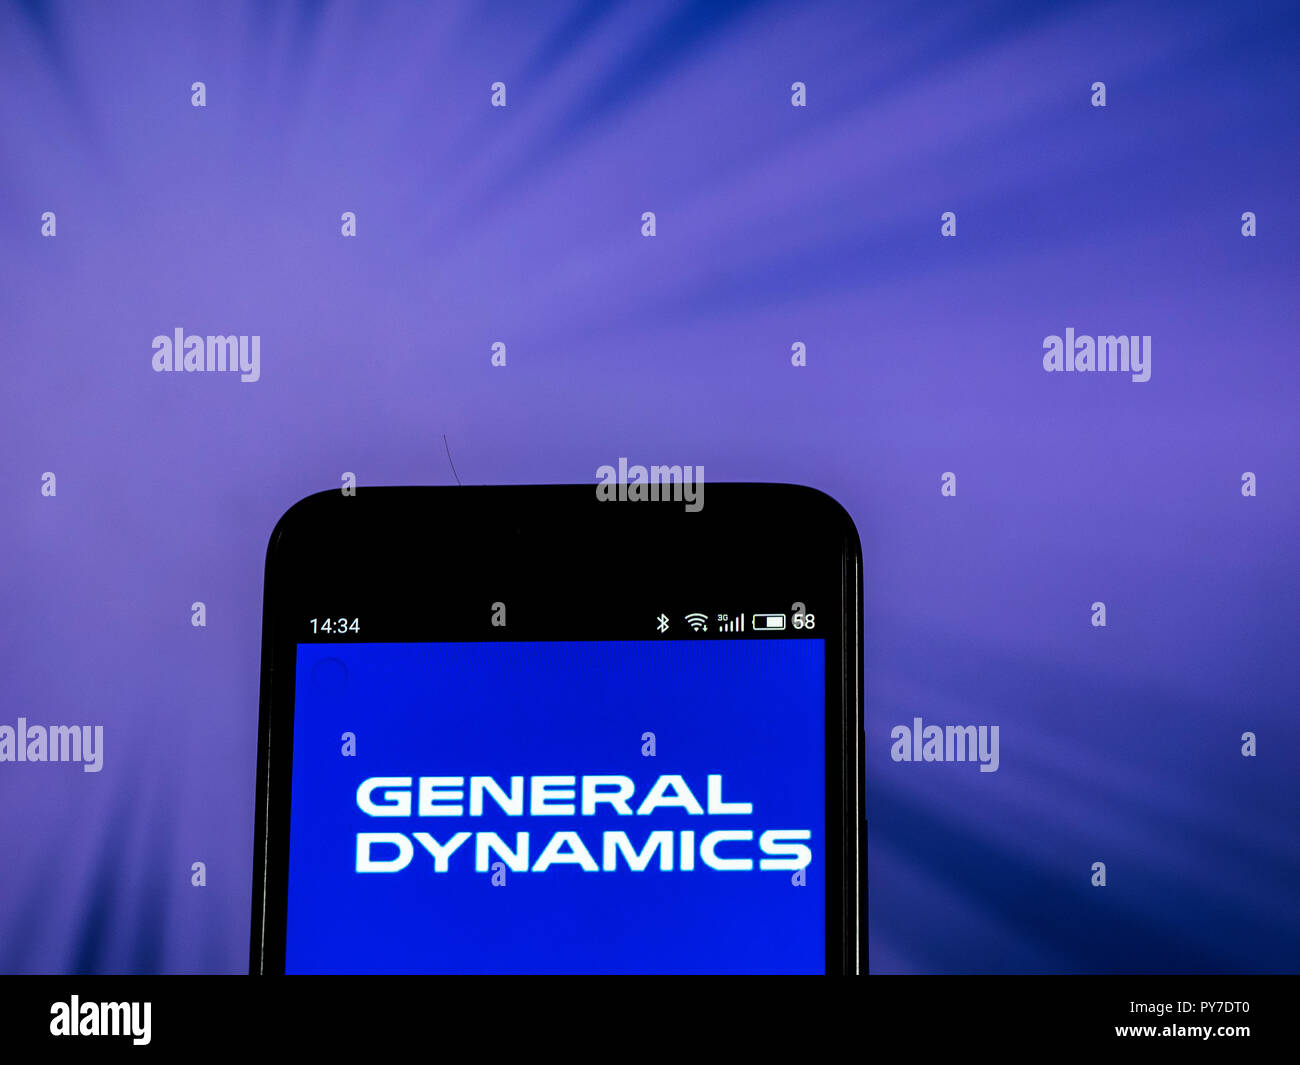 General Dynamics Aerospace and defense company logo seen displayed on smart phone. General Dynamics Corporation is an American corporation formed by mergers and divestitures. It is the world's fifth-largest defense contractor based on 2012 revenues. Stock Photo